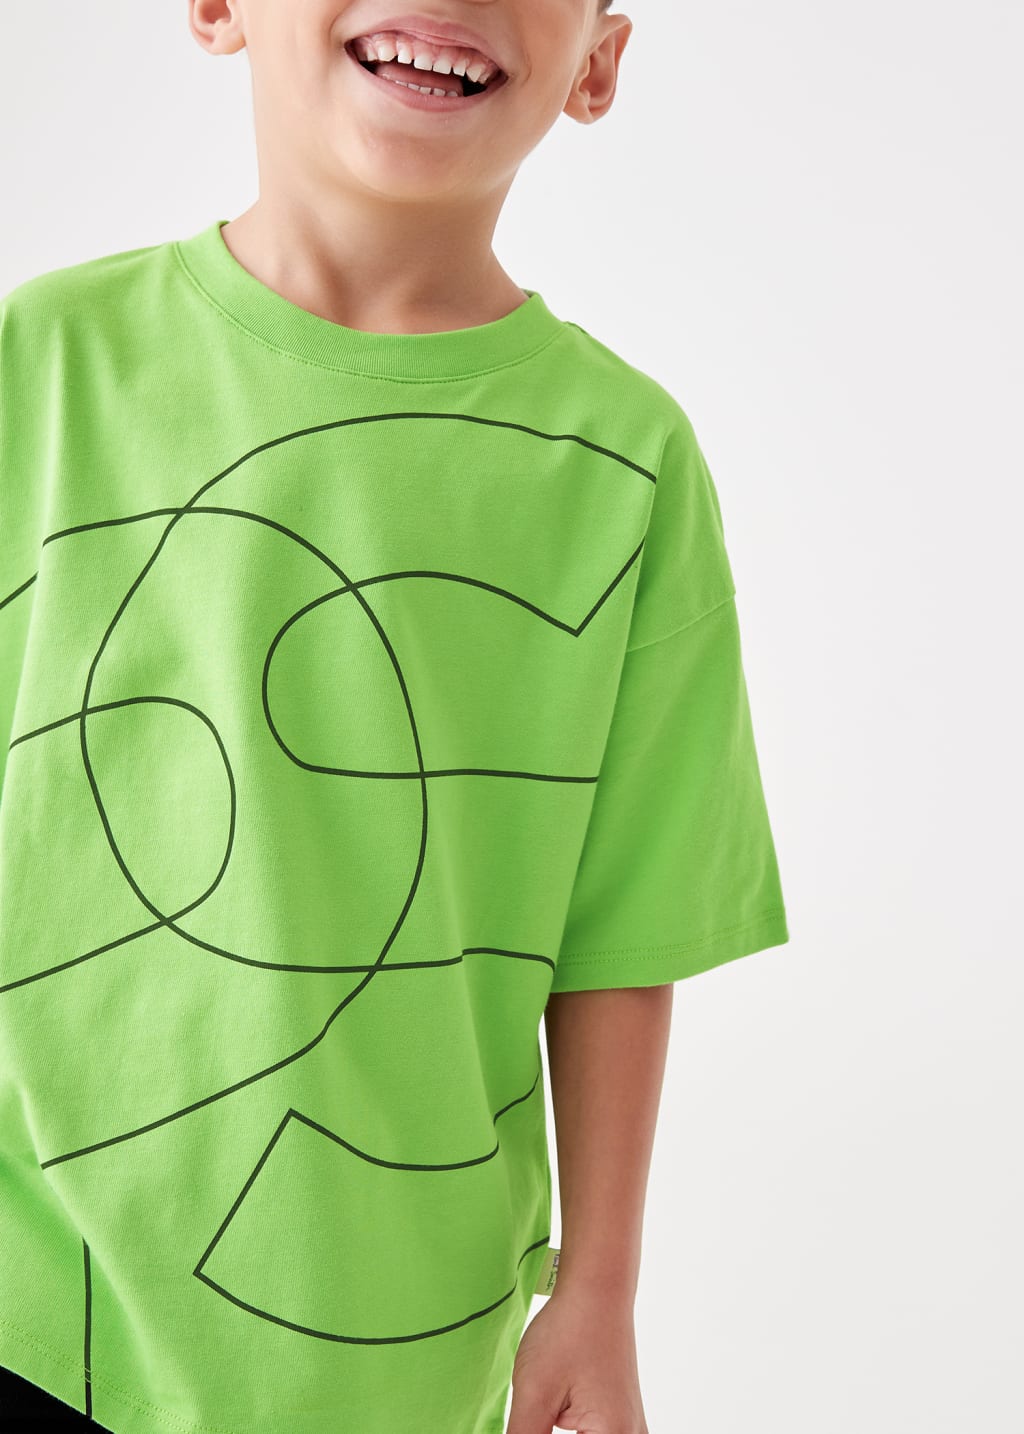 Model view - 2-13 Years Green Oversized Print T-Shirt Paul Smith